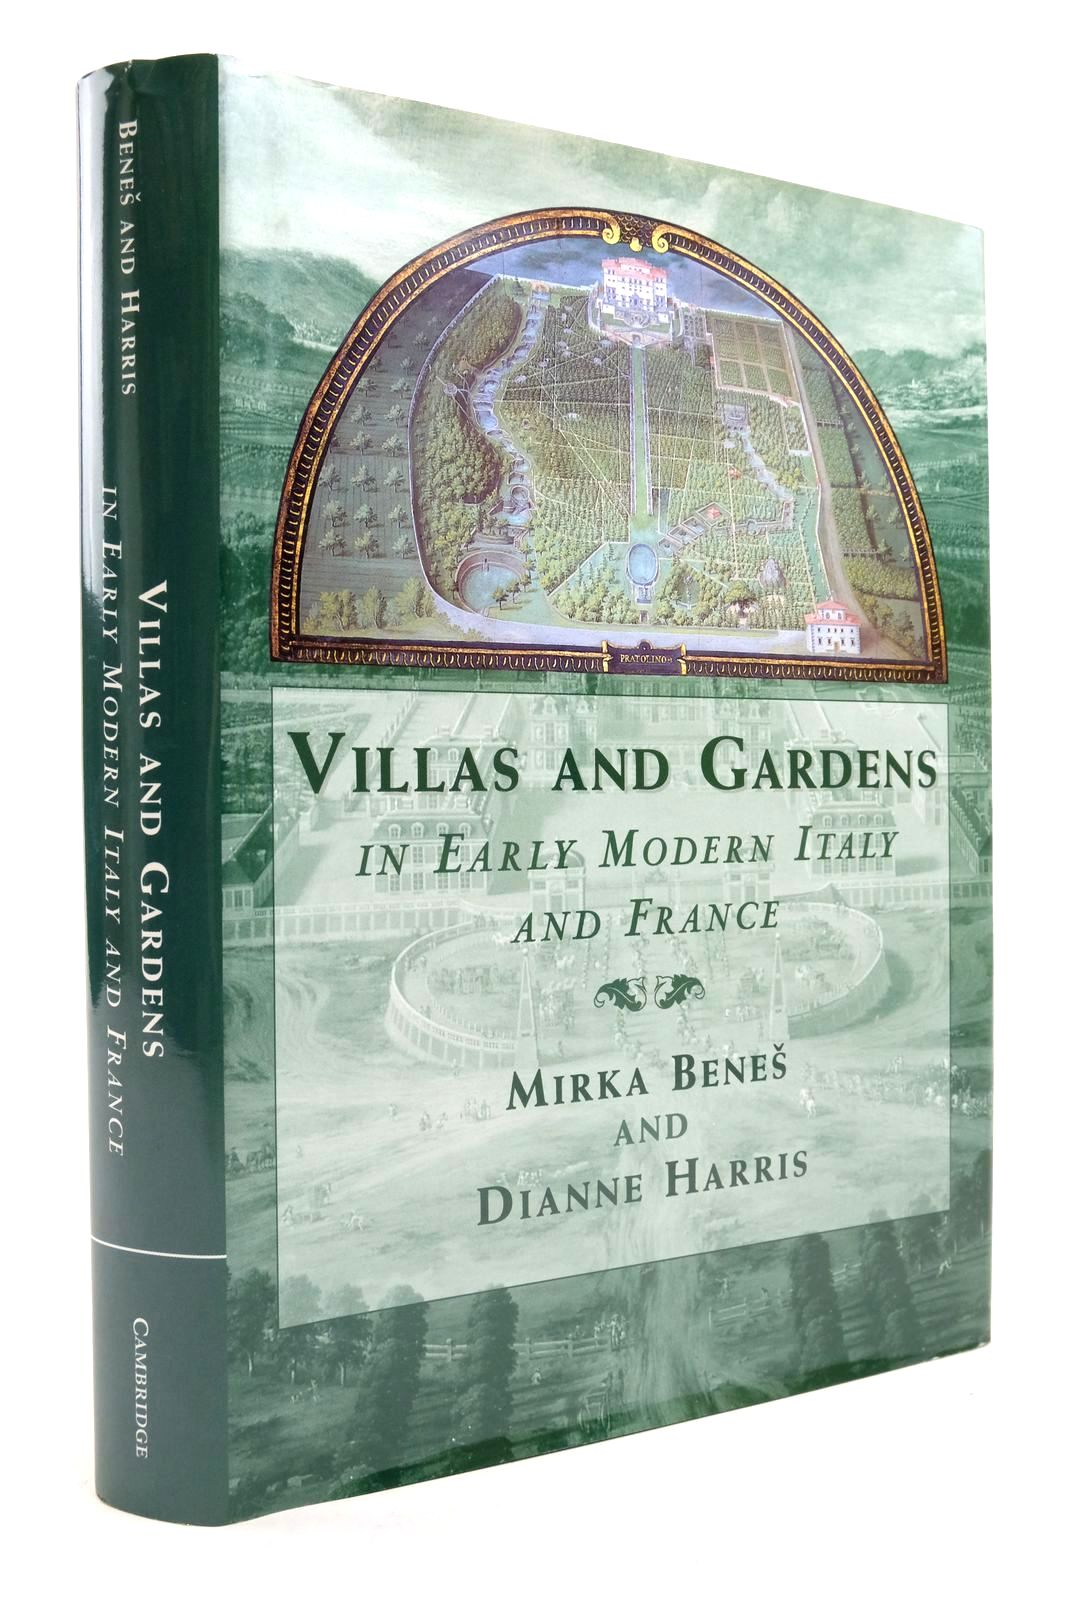 Photo of VILLAS AND GARDENS IN EARLY AND MODERN ITALY AND FRANCE written by Benes, Mirka
Harris, Dianne published by Cambridge University Press (STOCK CODE: 2138855)  for sale by Stella & Rose's Books